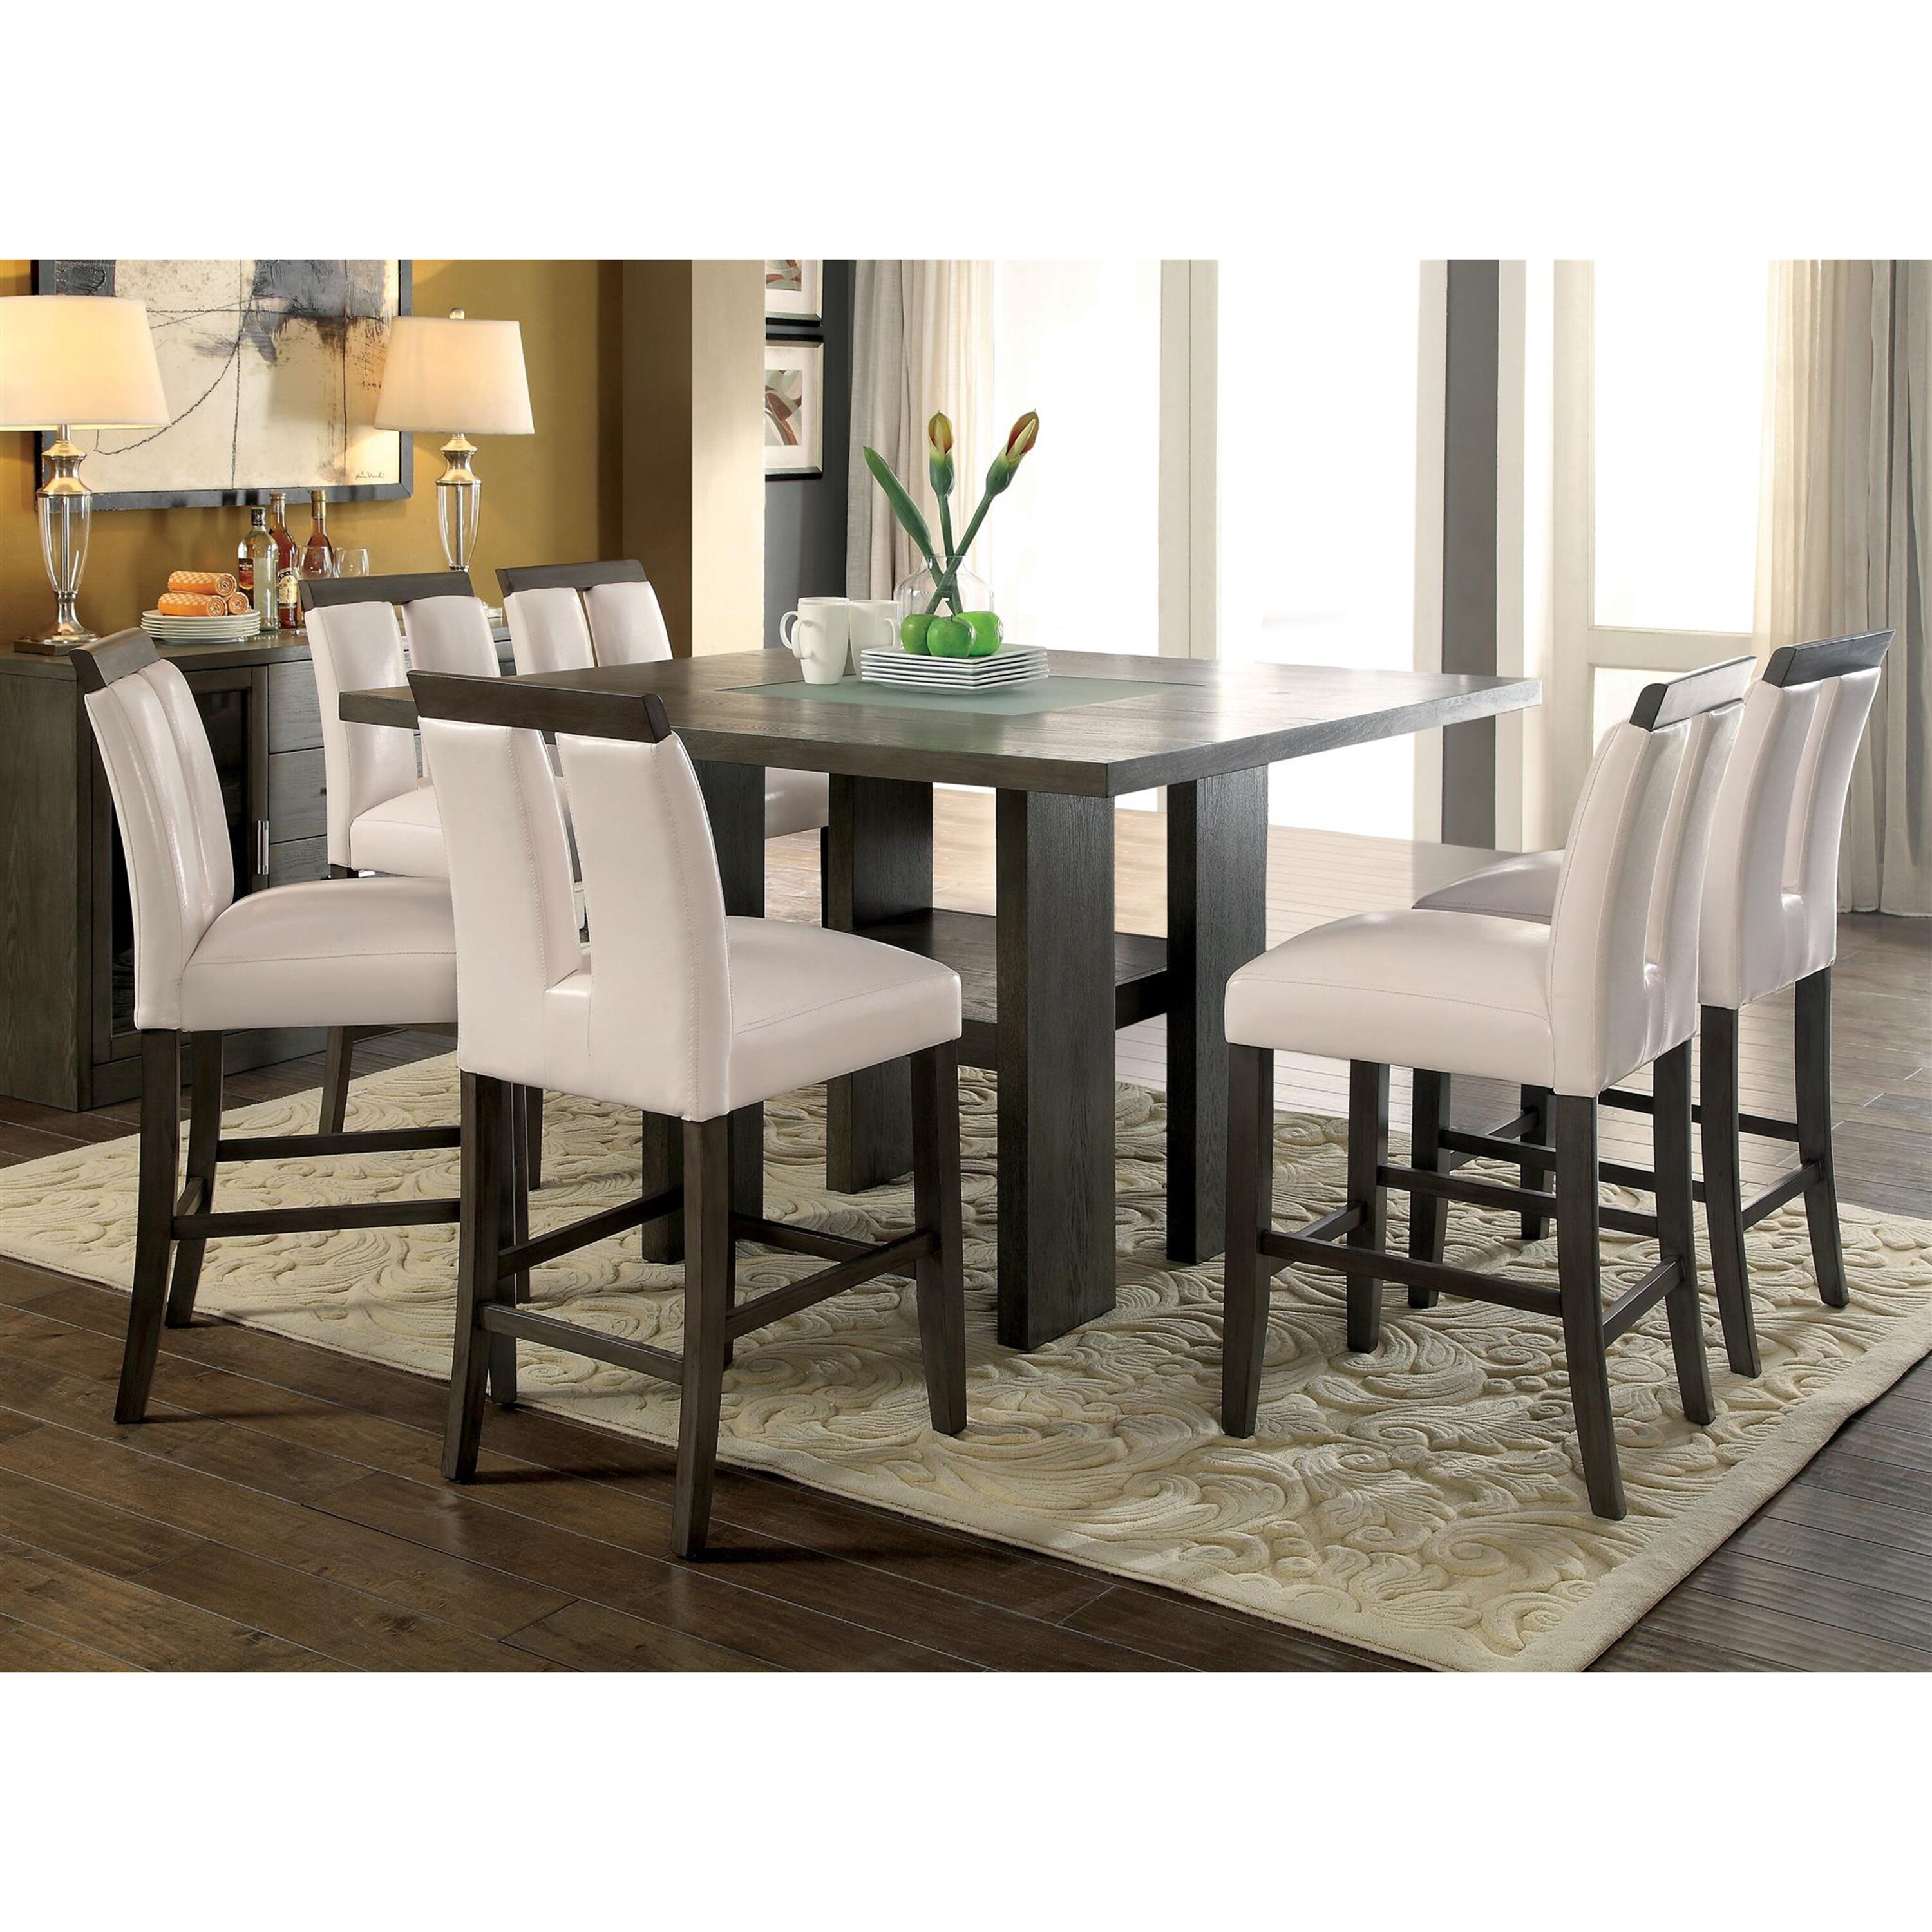 Furniture Of America Quia Contemporary Grey 7 Piece Counter Table Set Overstock 25325100